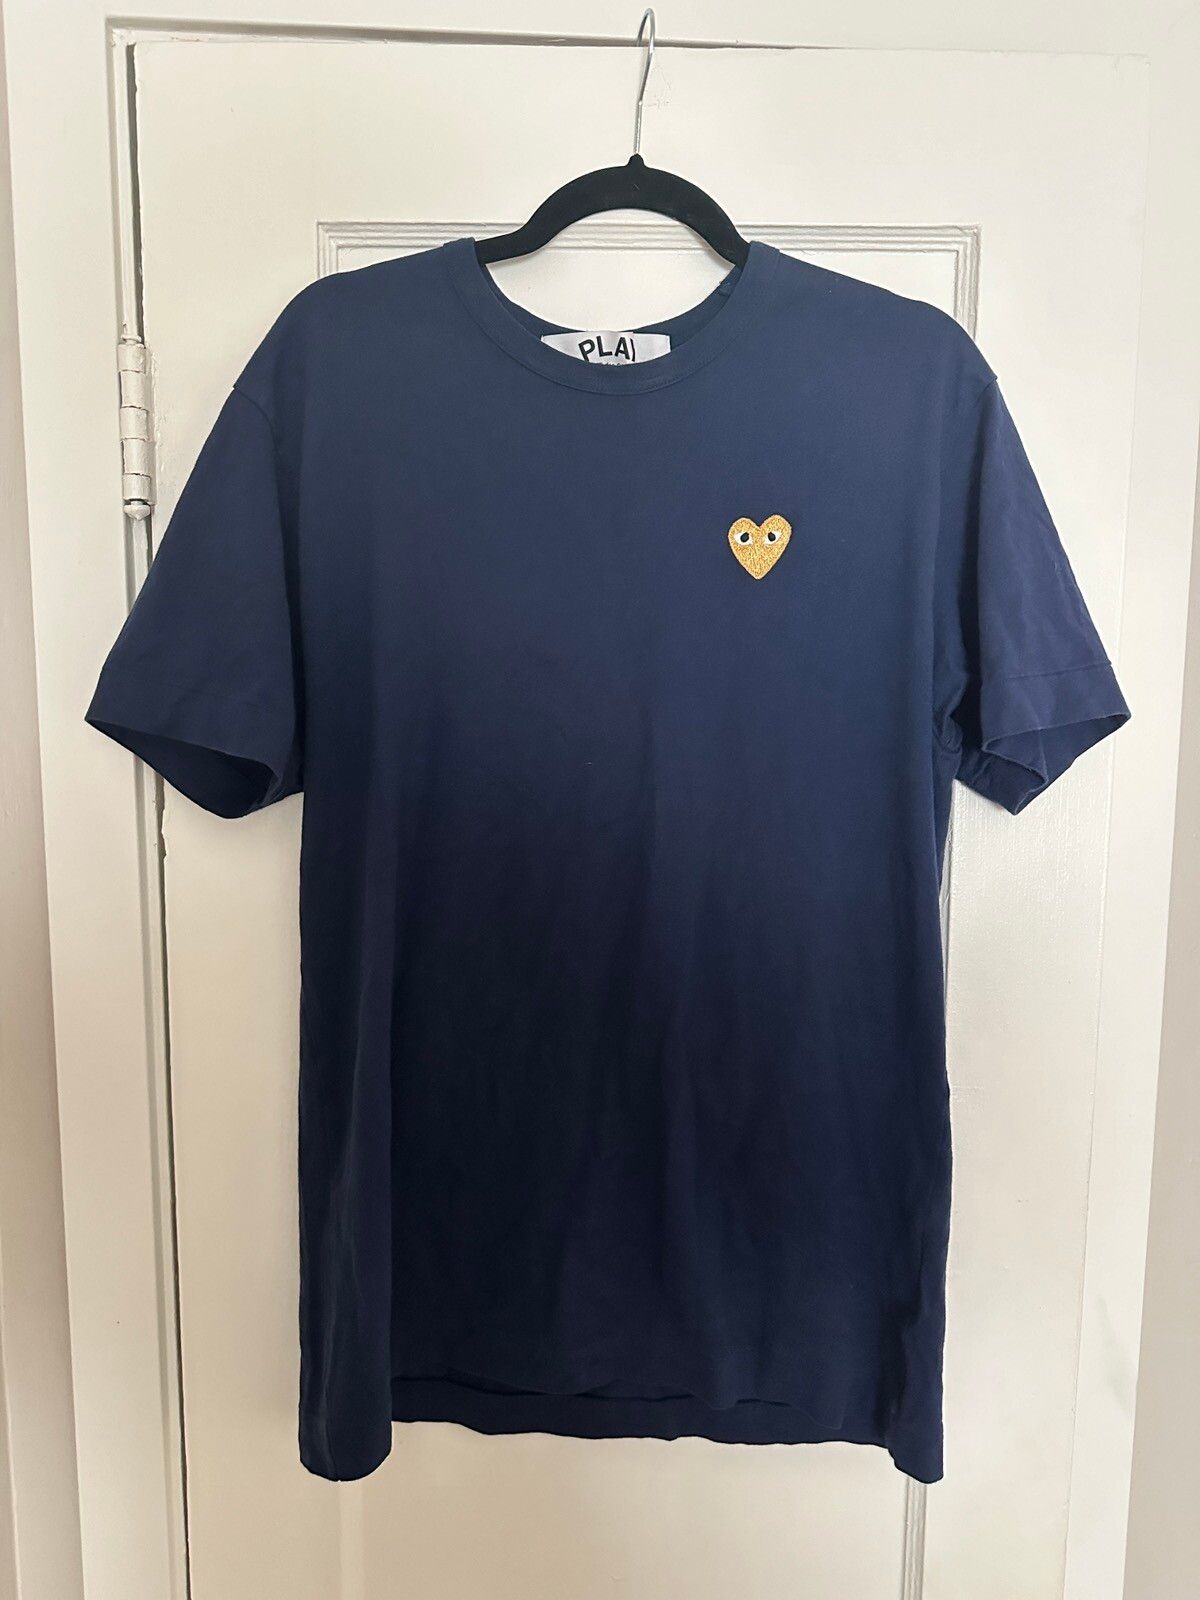 Comme Des Garcons Play CDG Play Short Sleeve Navy T-Shirt Gold logo Size US XL / EU 56 / 4 - 4 Preview